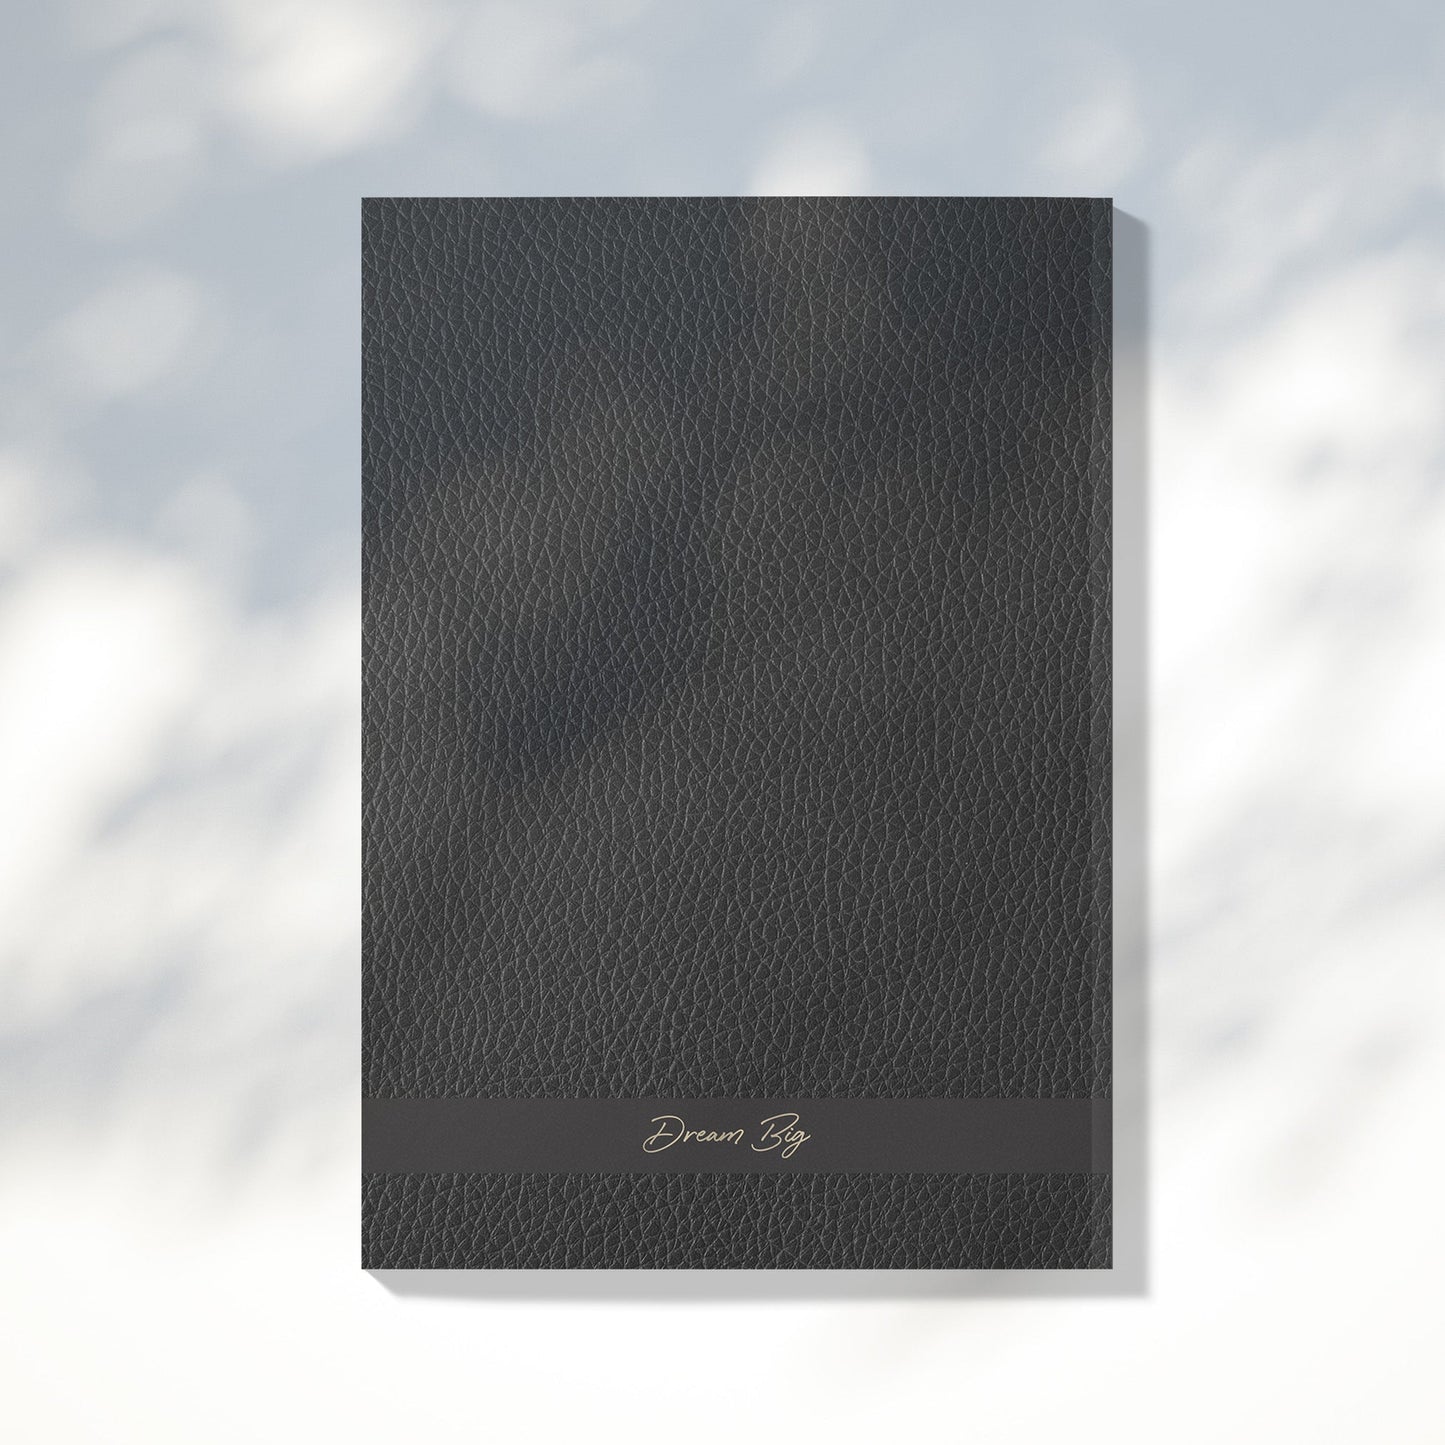 The Inspired Equestrian Journal - Singles - Lessons (International Orders)